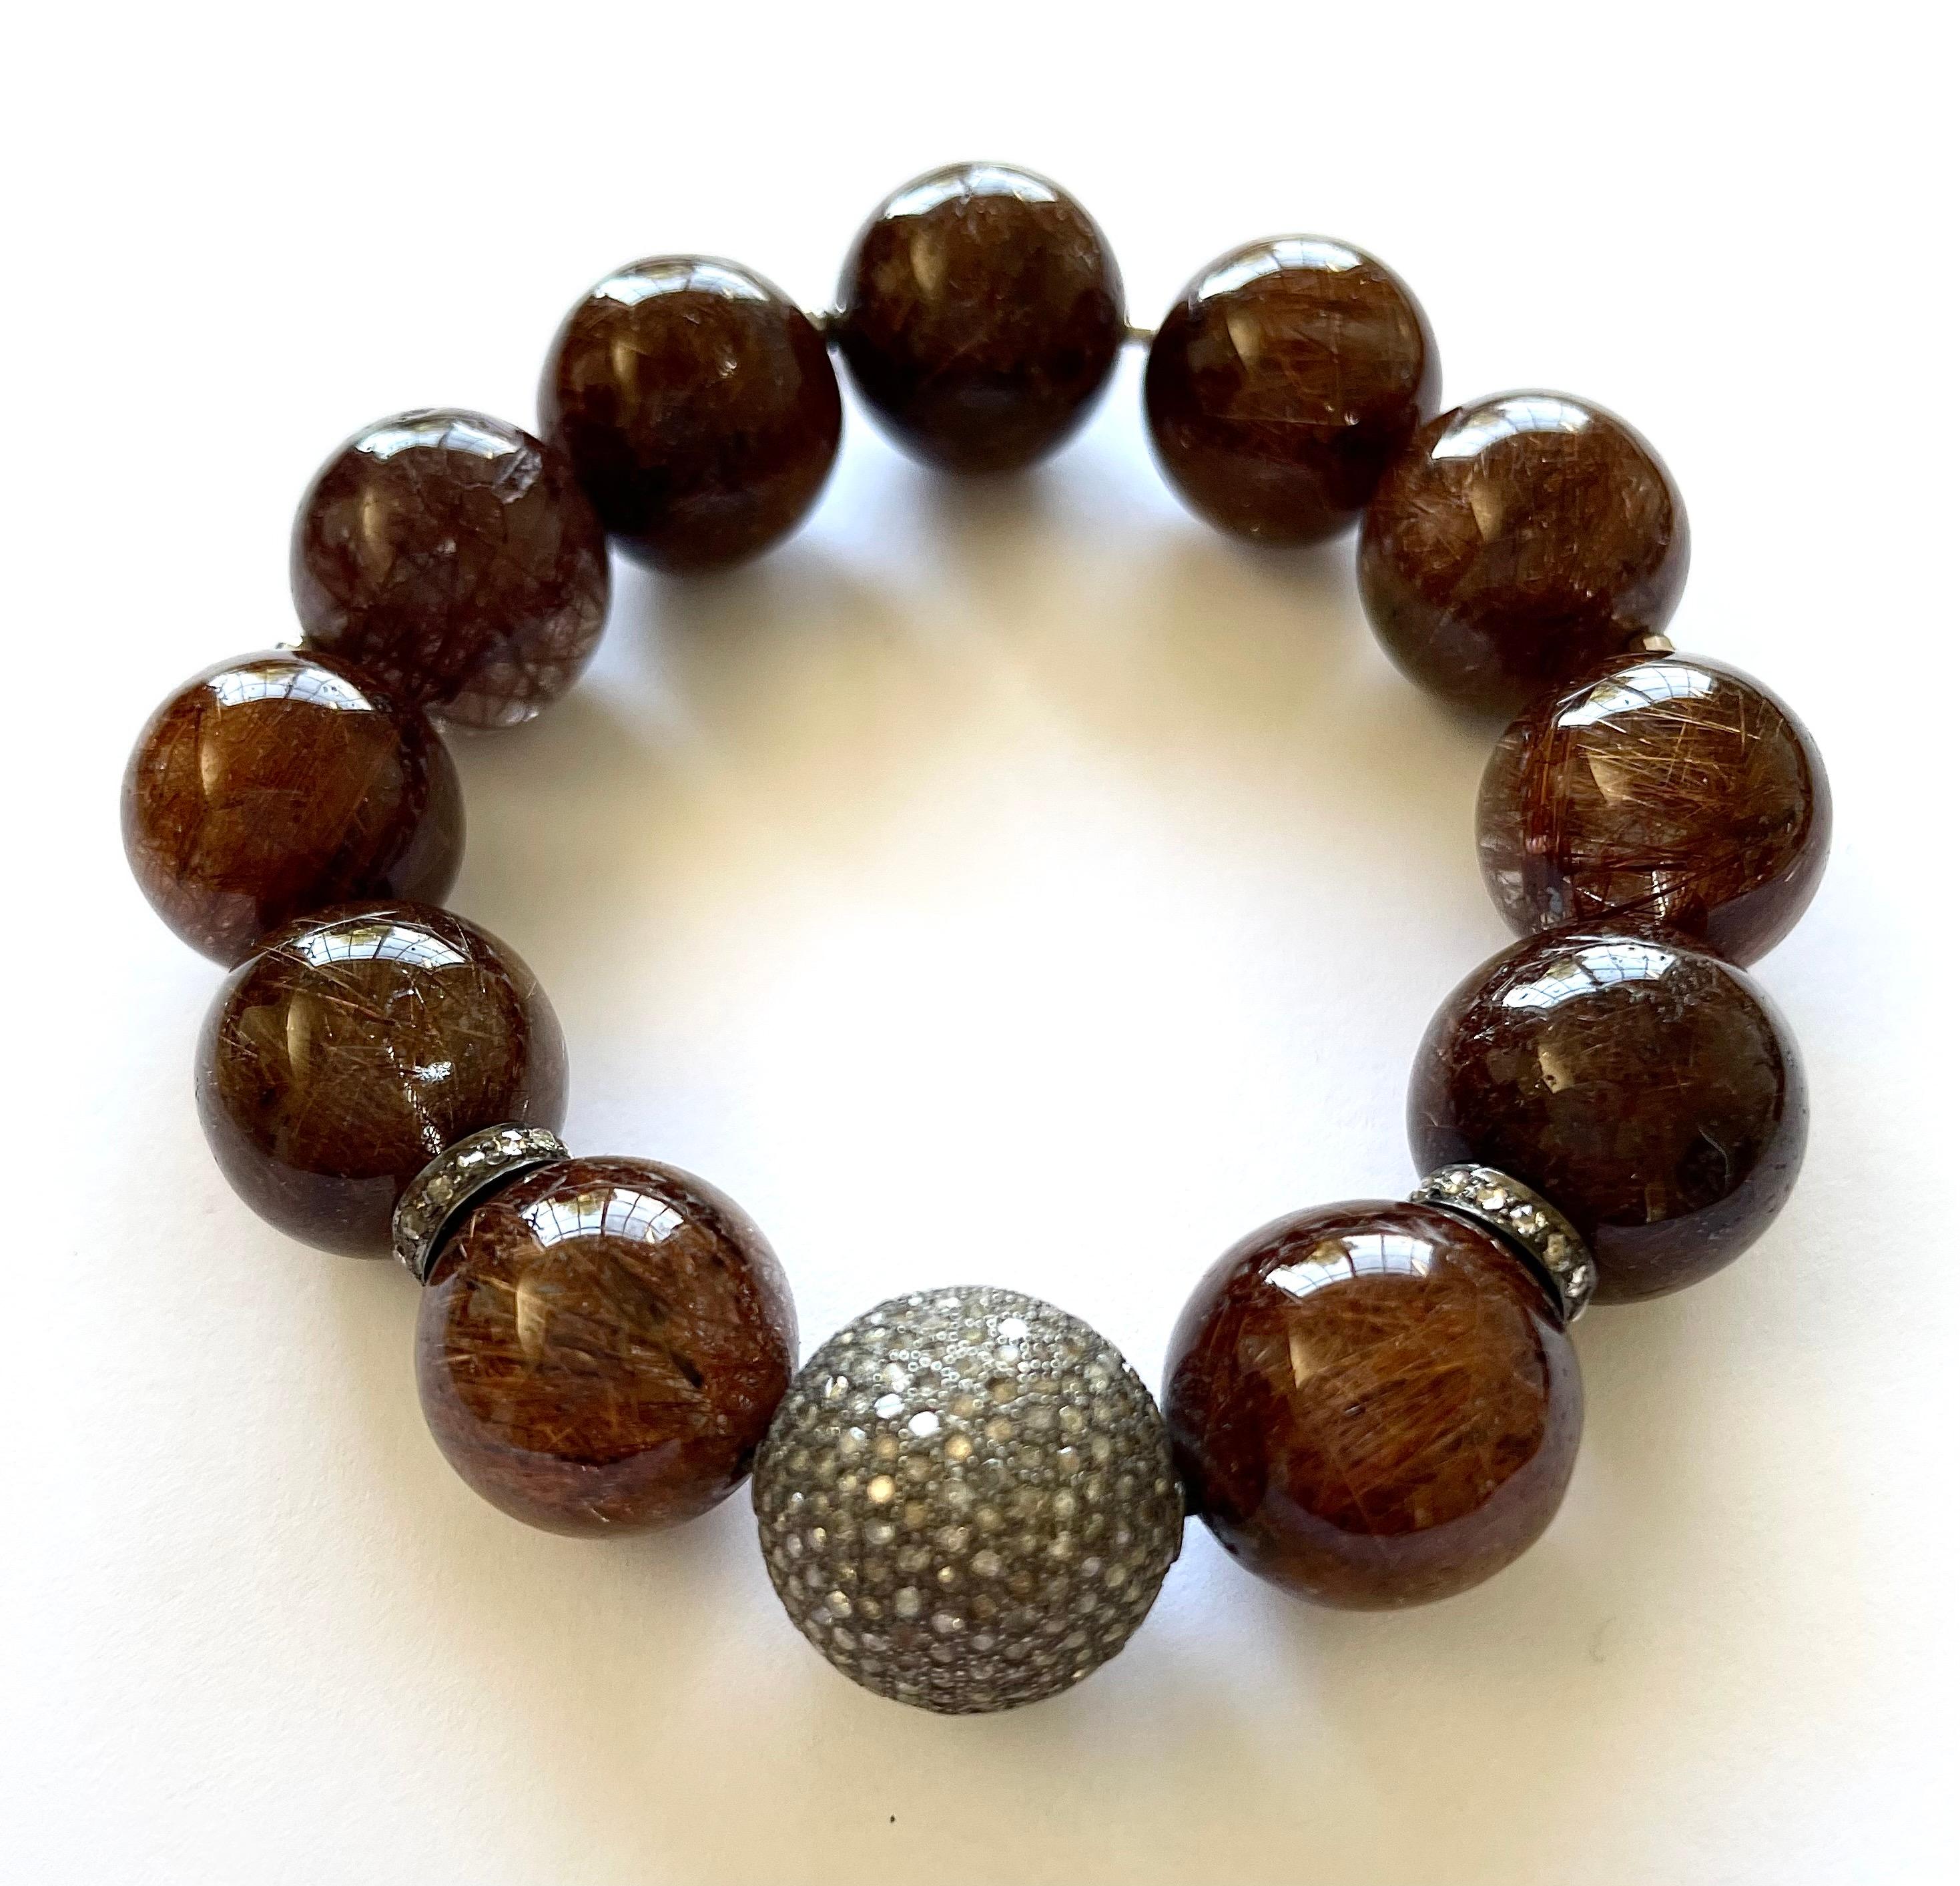 Description
This superior quality, rare coppery-brown Rutilated Quartz, dramatically accented with a stunning, large 16mm pave diamond ball and pave diamond rondelles makes this stretchy bracelet a fashion must have on your wrist.
Item #